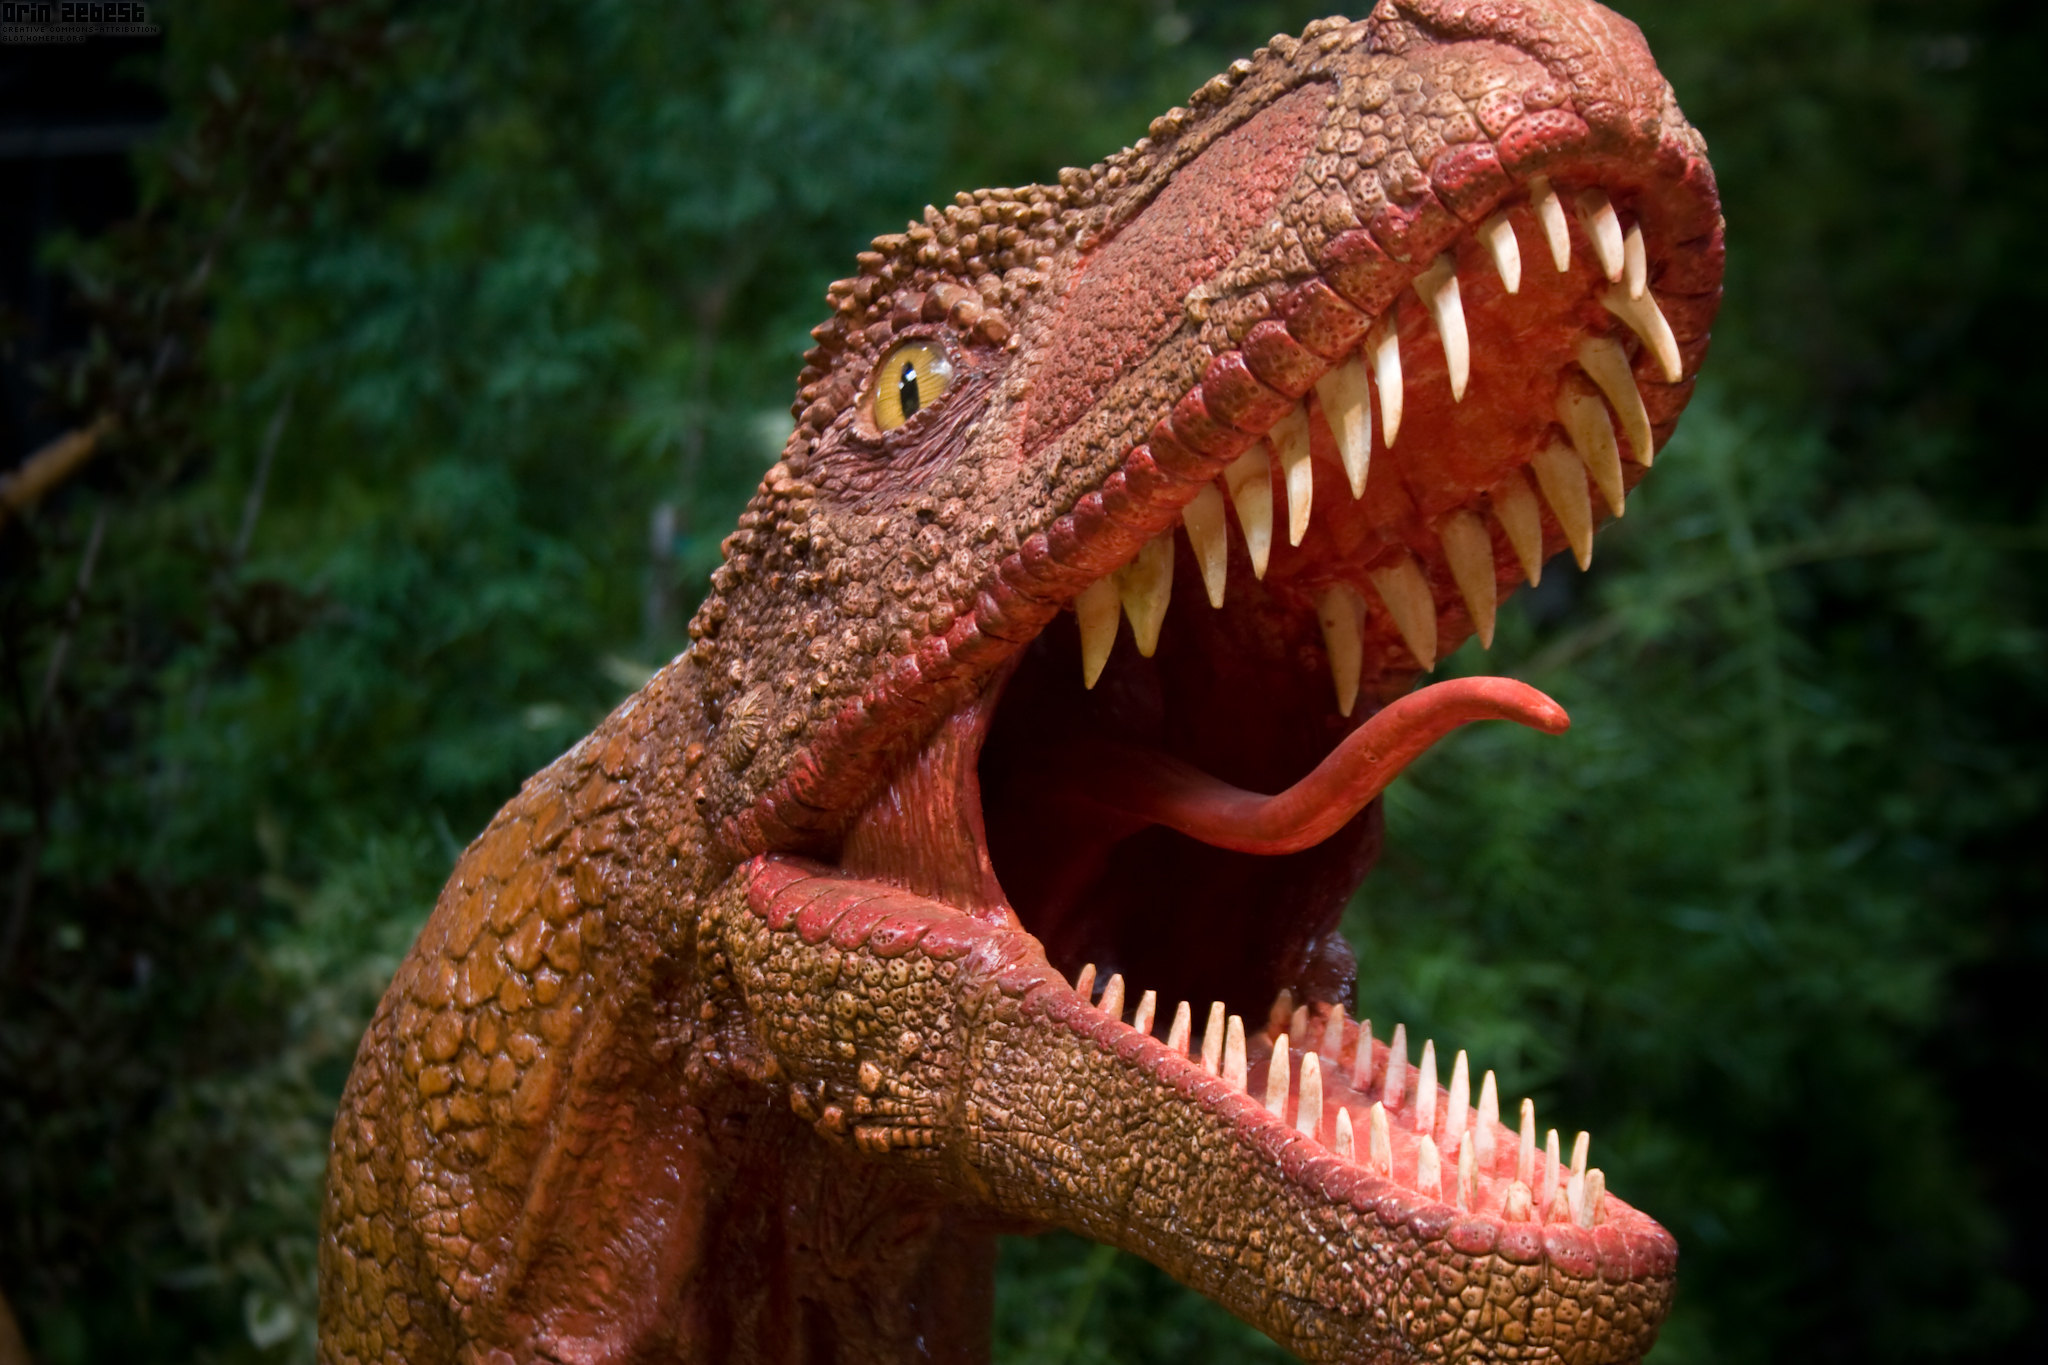 Dinosaurs May Have Cooed, Not Roared